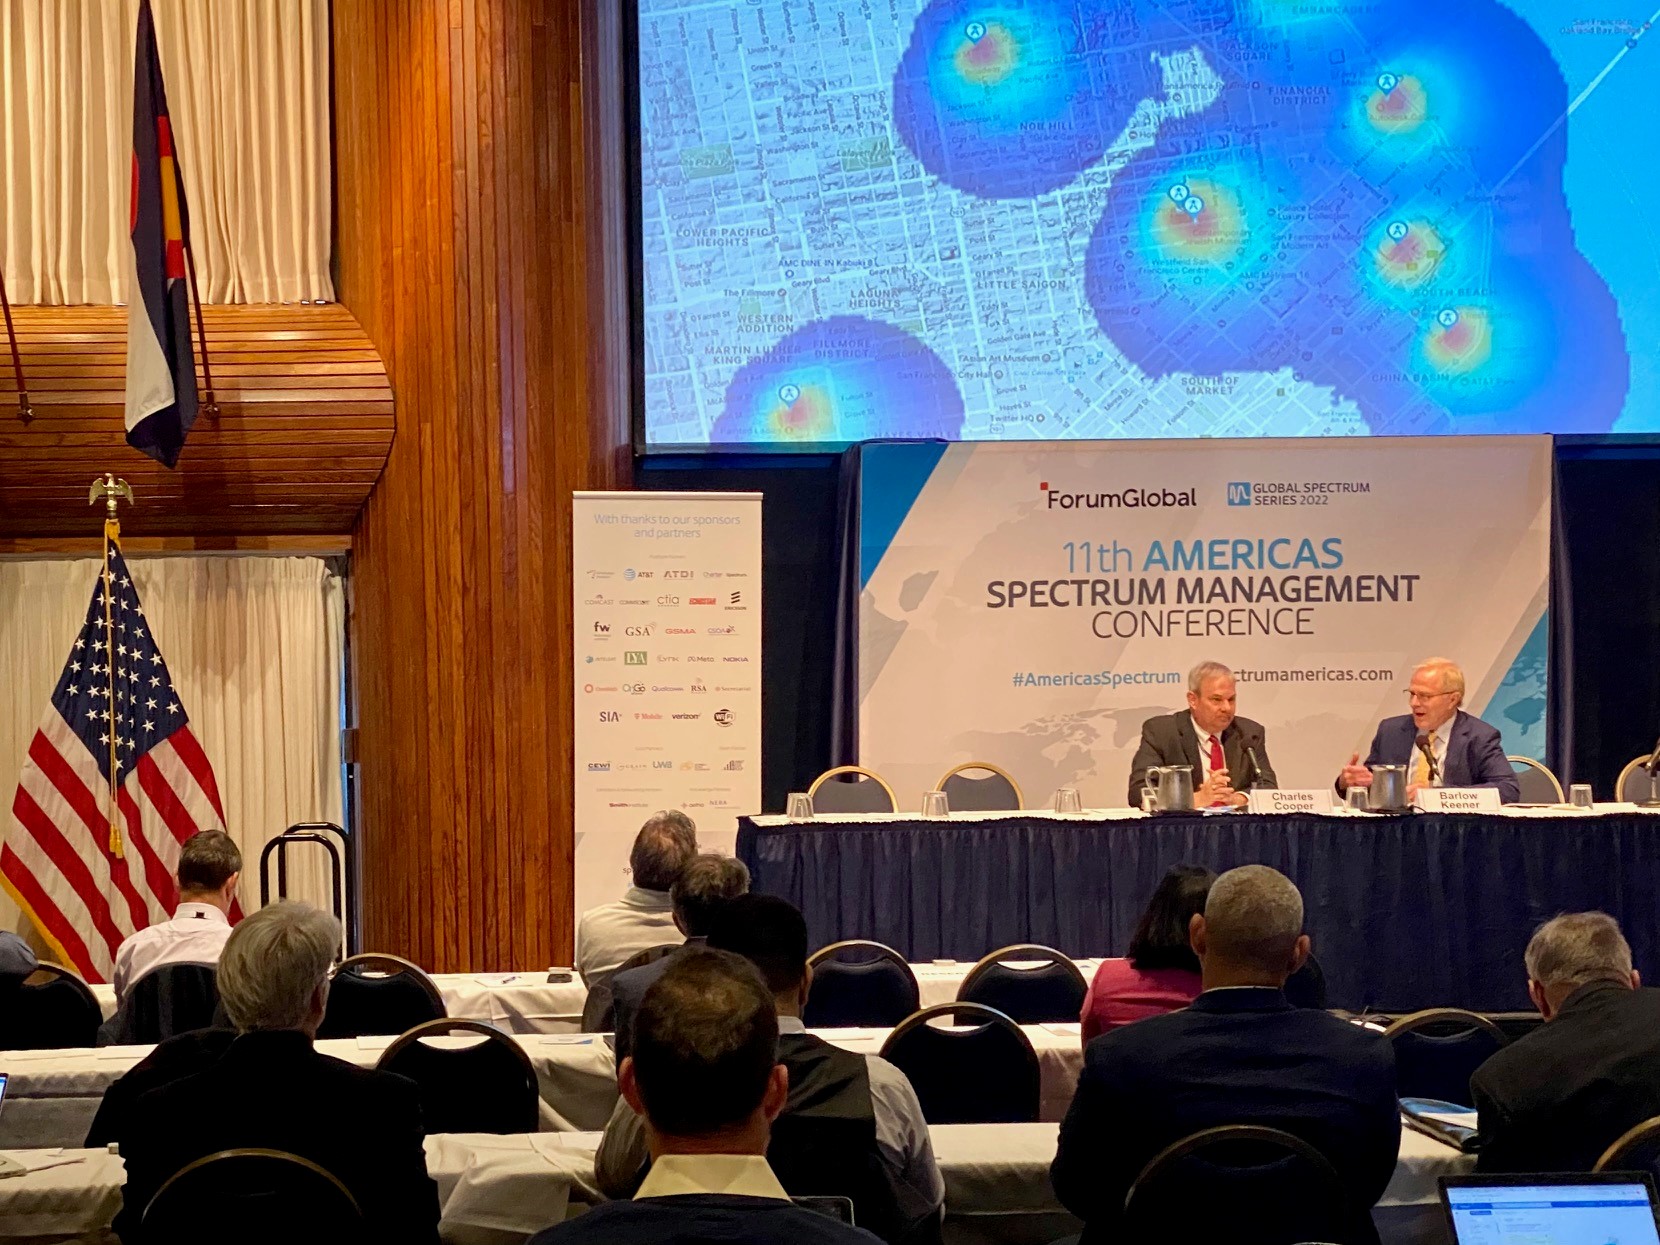 A zoomed-out image of the audience listening to a panel discussion on “Avoiding Harmful Interference: Are Current Interference Standards and Protection Sufficient in the 5G Era?"